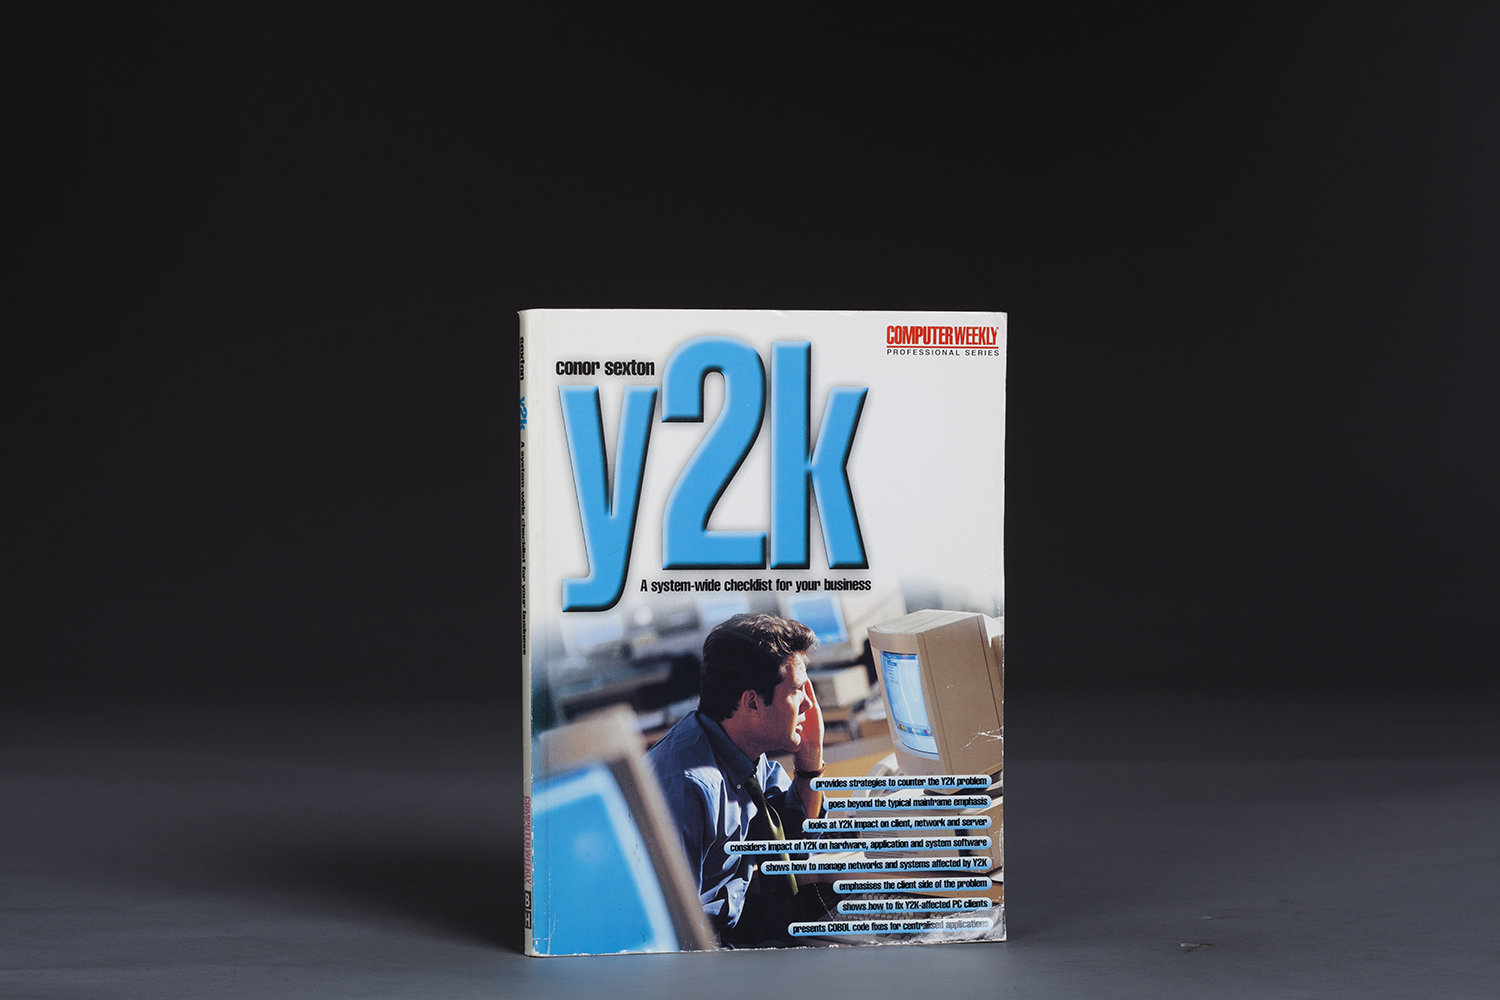 Y2K - A System-wide Checklist for Your Business - 1010 Cover.jpg